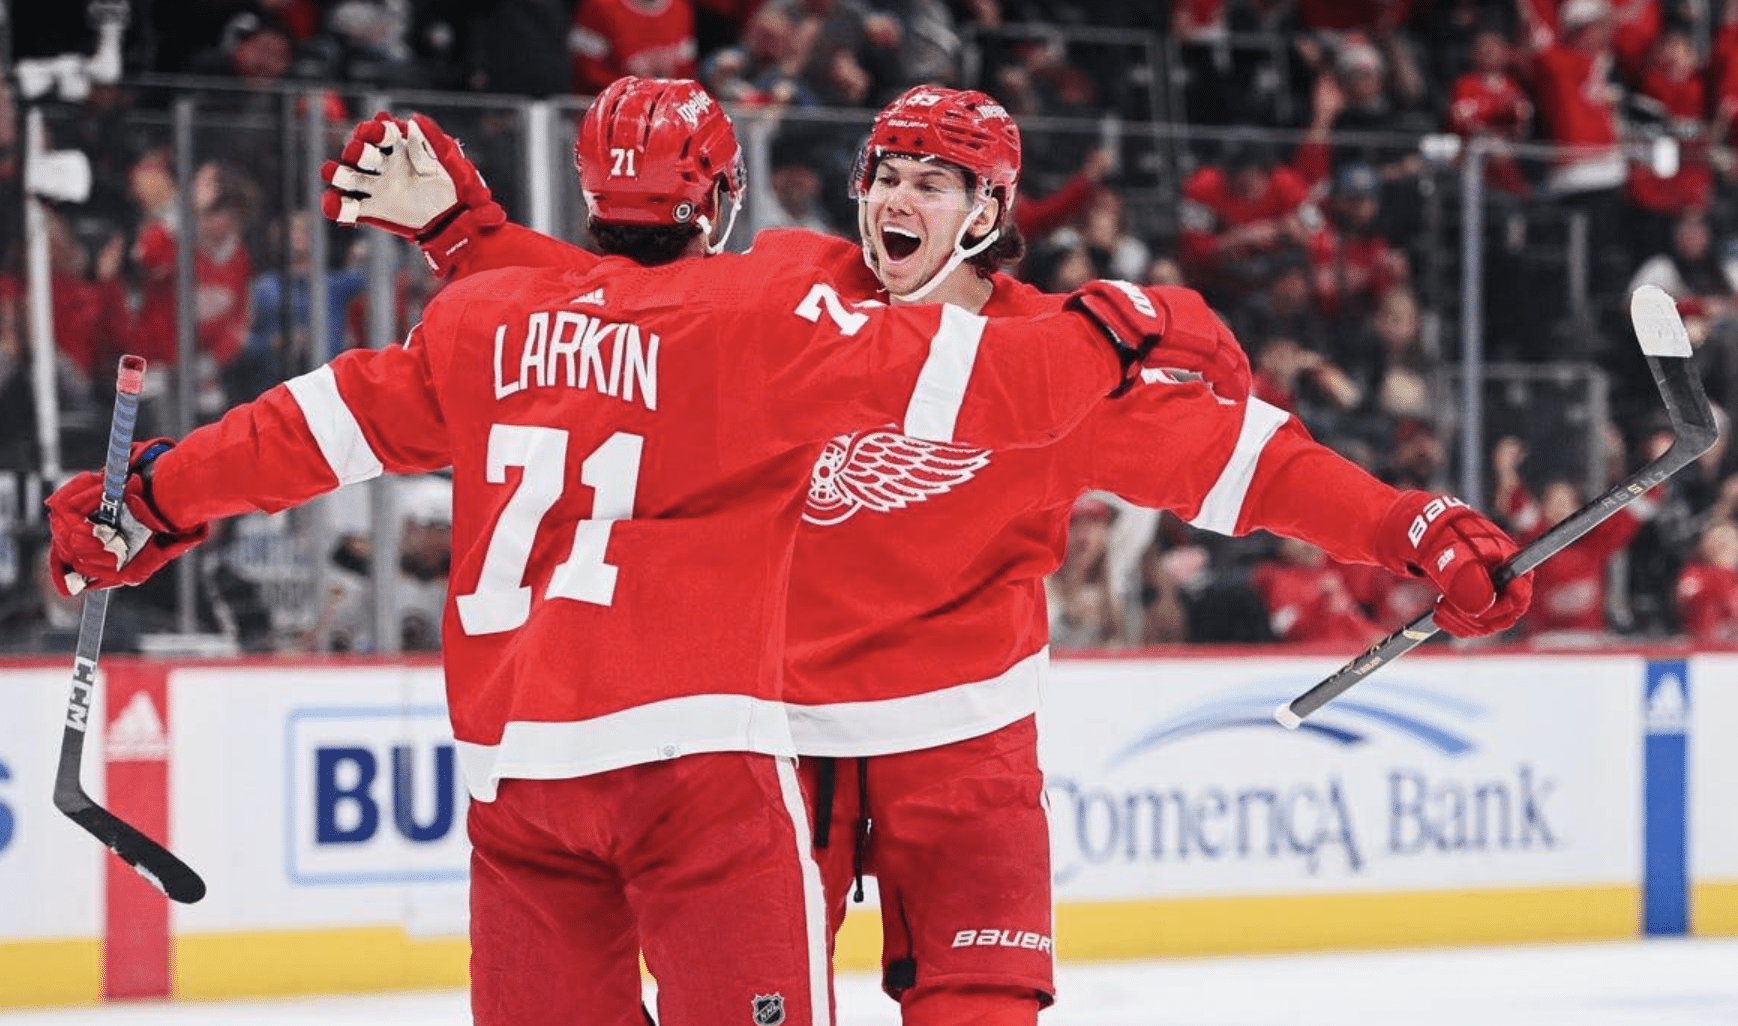 Detroit Red Wings activate Photo Credit: Tim Fuller, USA Today Sports